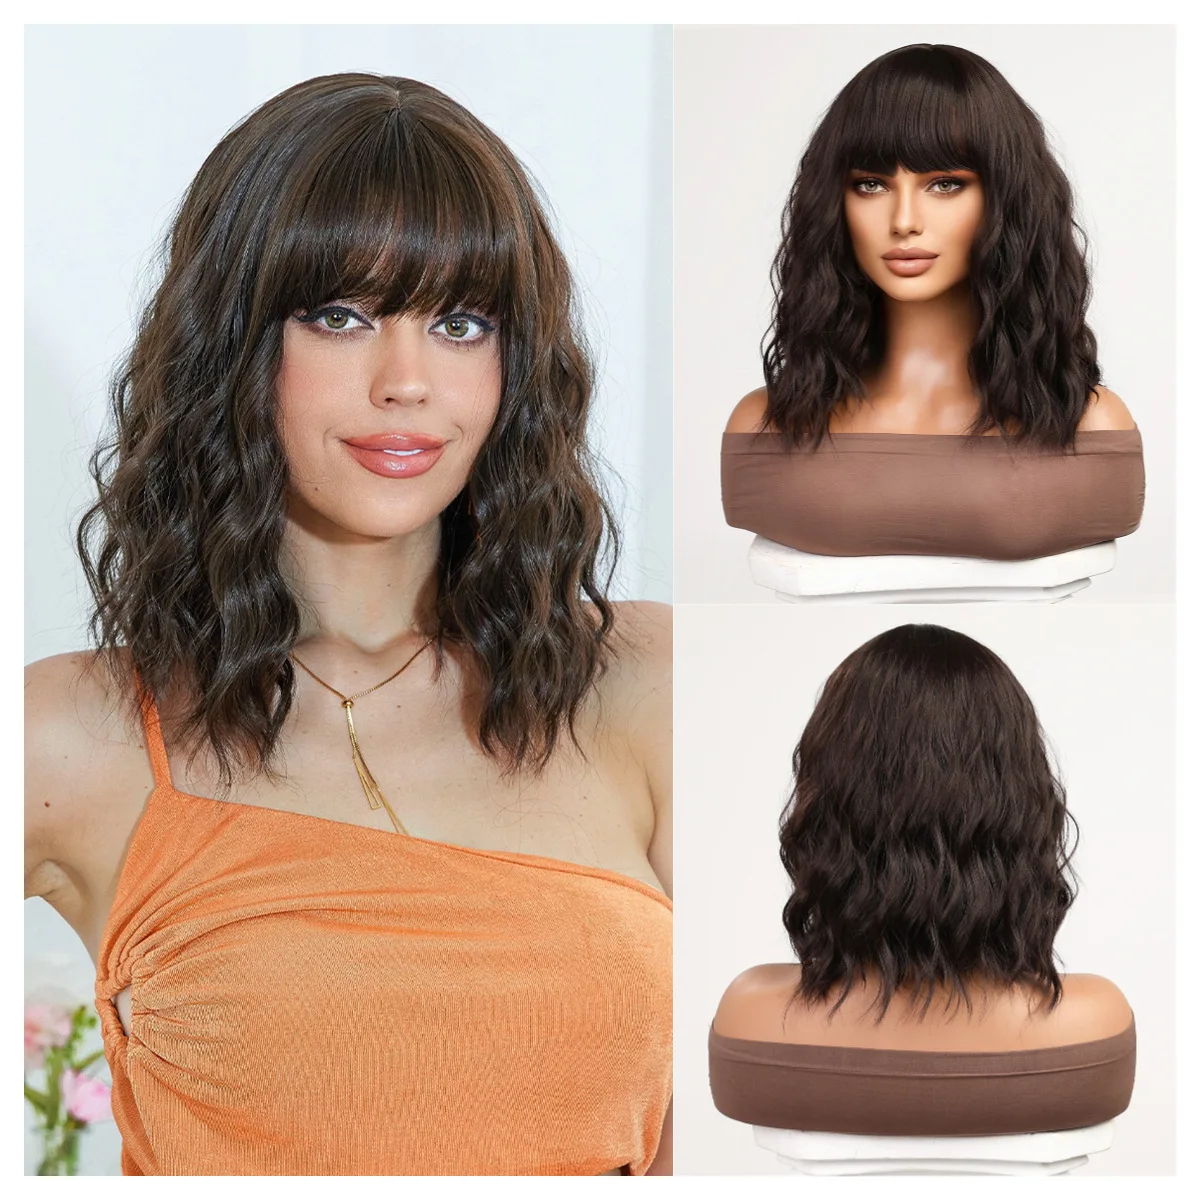 

SNQP Short Curly Synthetic Wig with Bangs for Women 14inch Ombre Black and Brown Wig for Daily Cosplay Party Use Heat Resistant